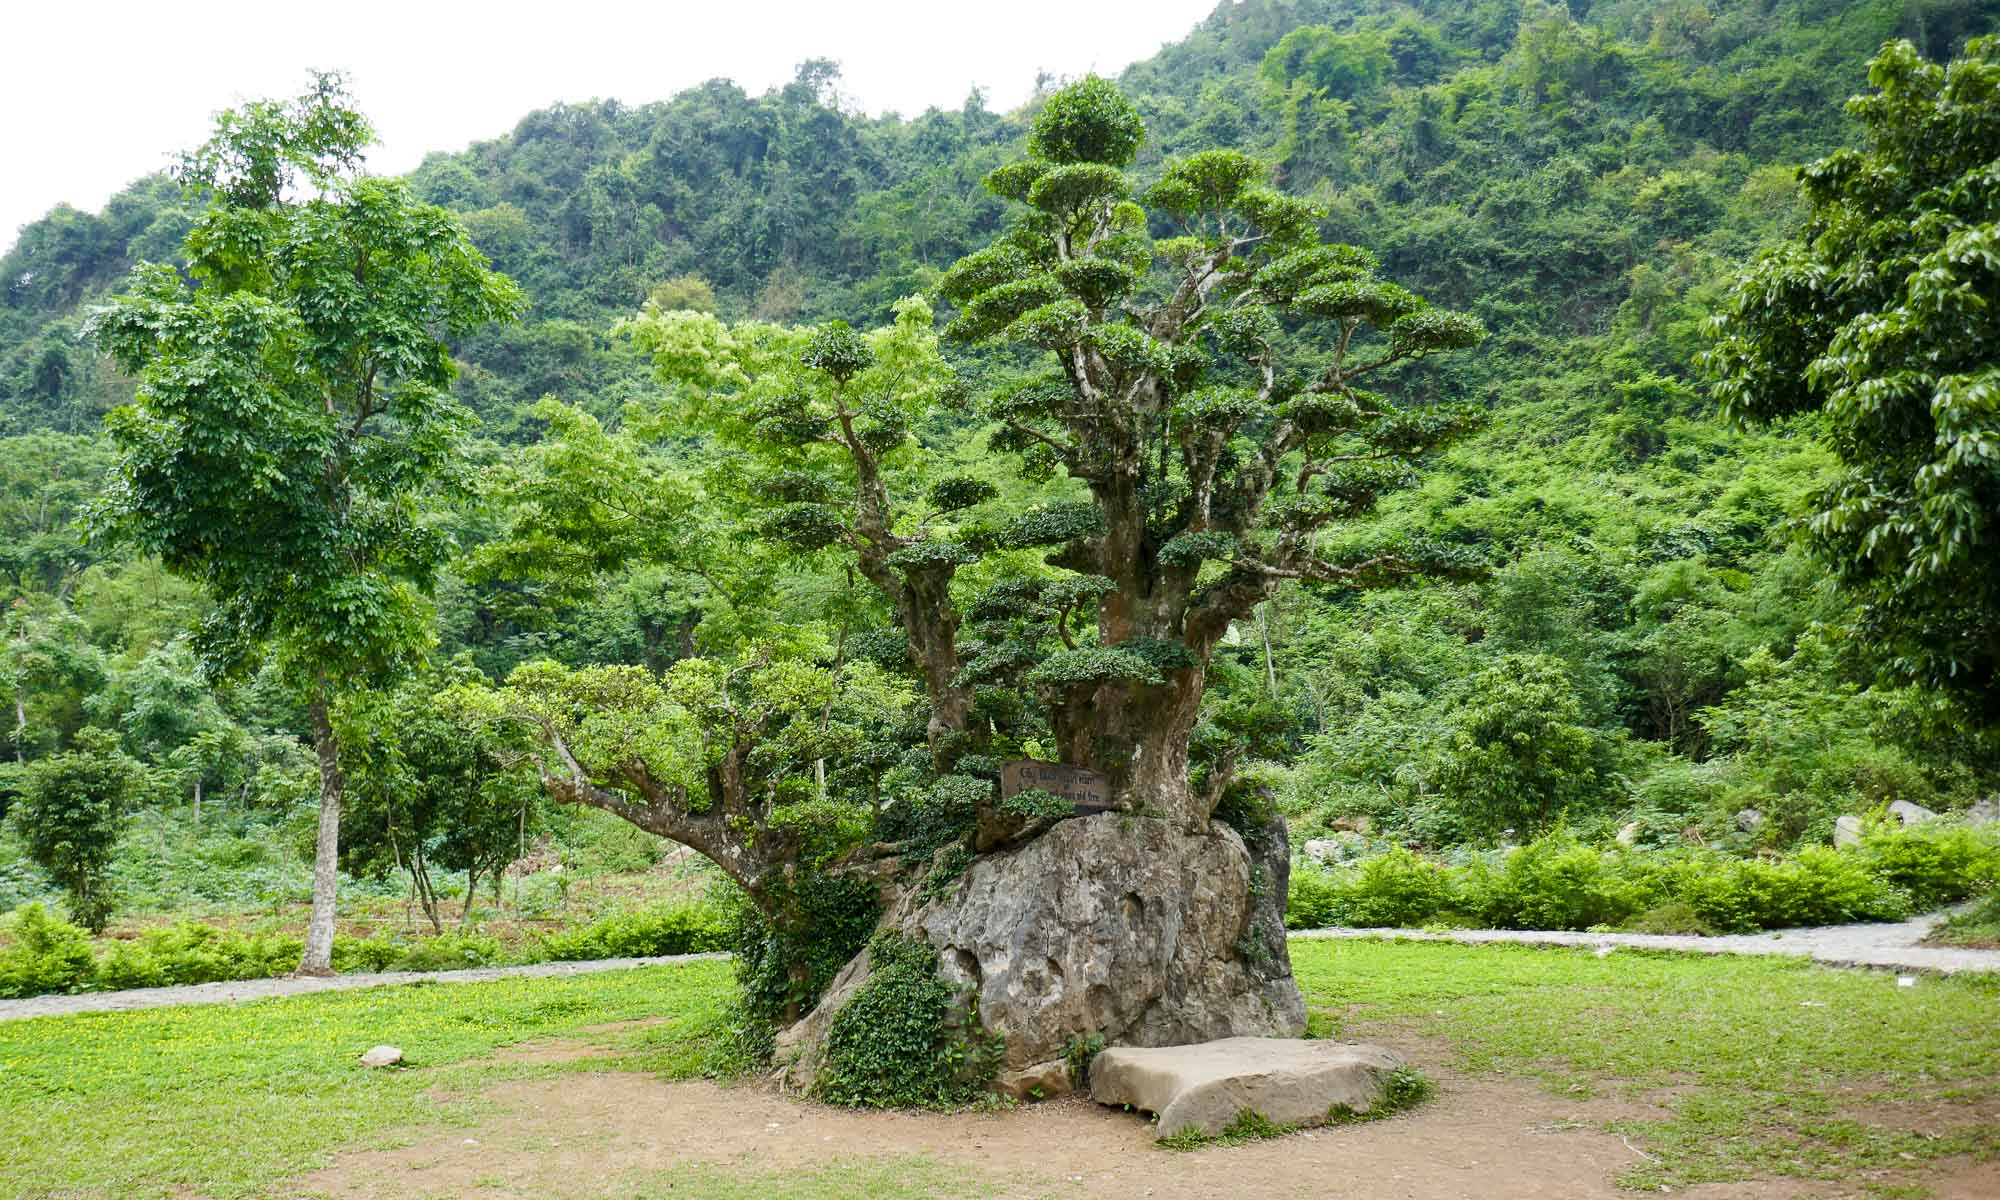 The thousand year old tree